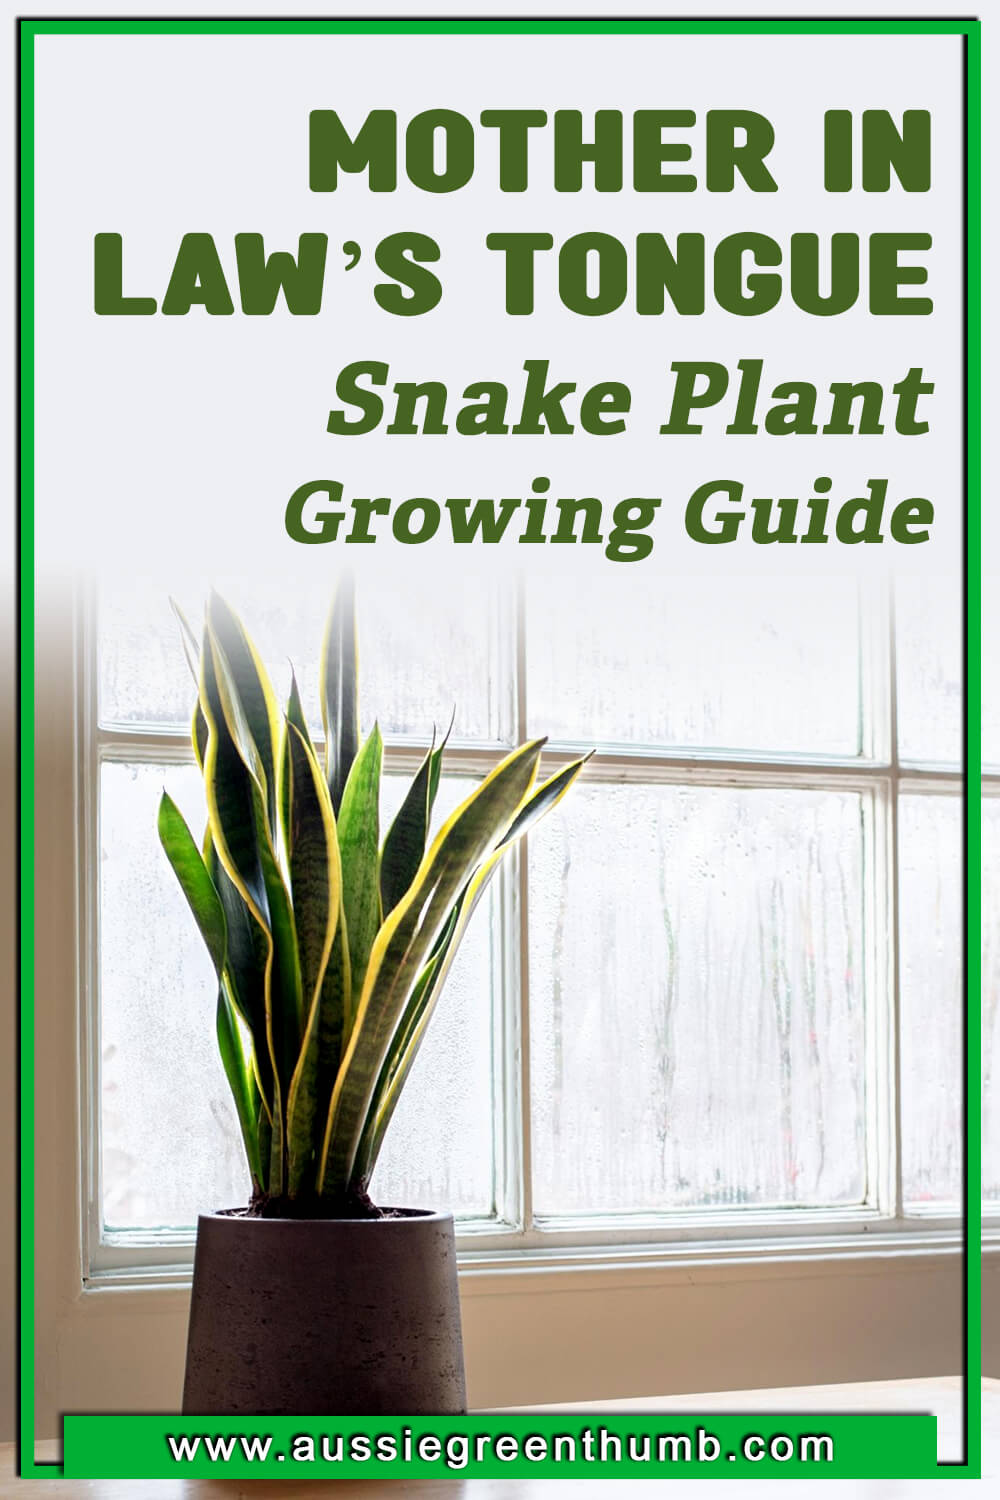 Mother in Law’s Tongue Snake Plant Growing Guide